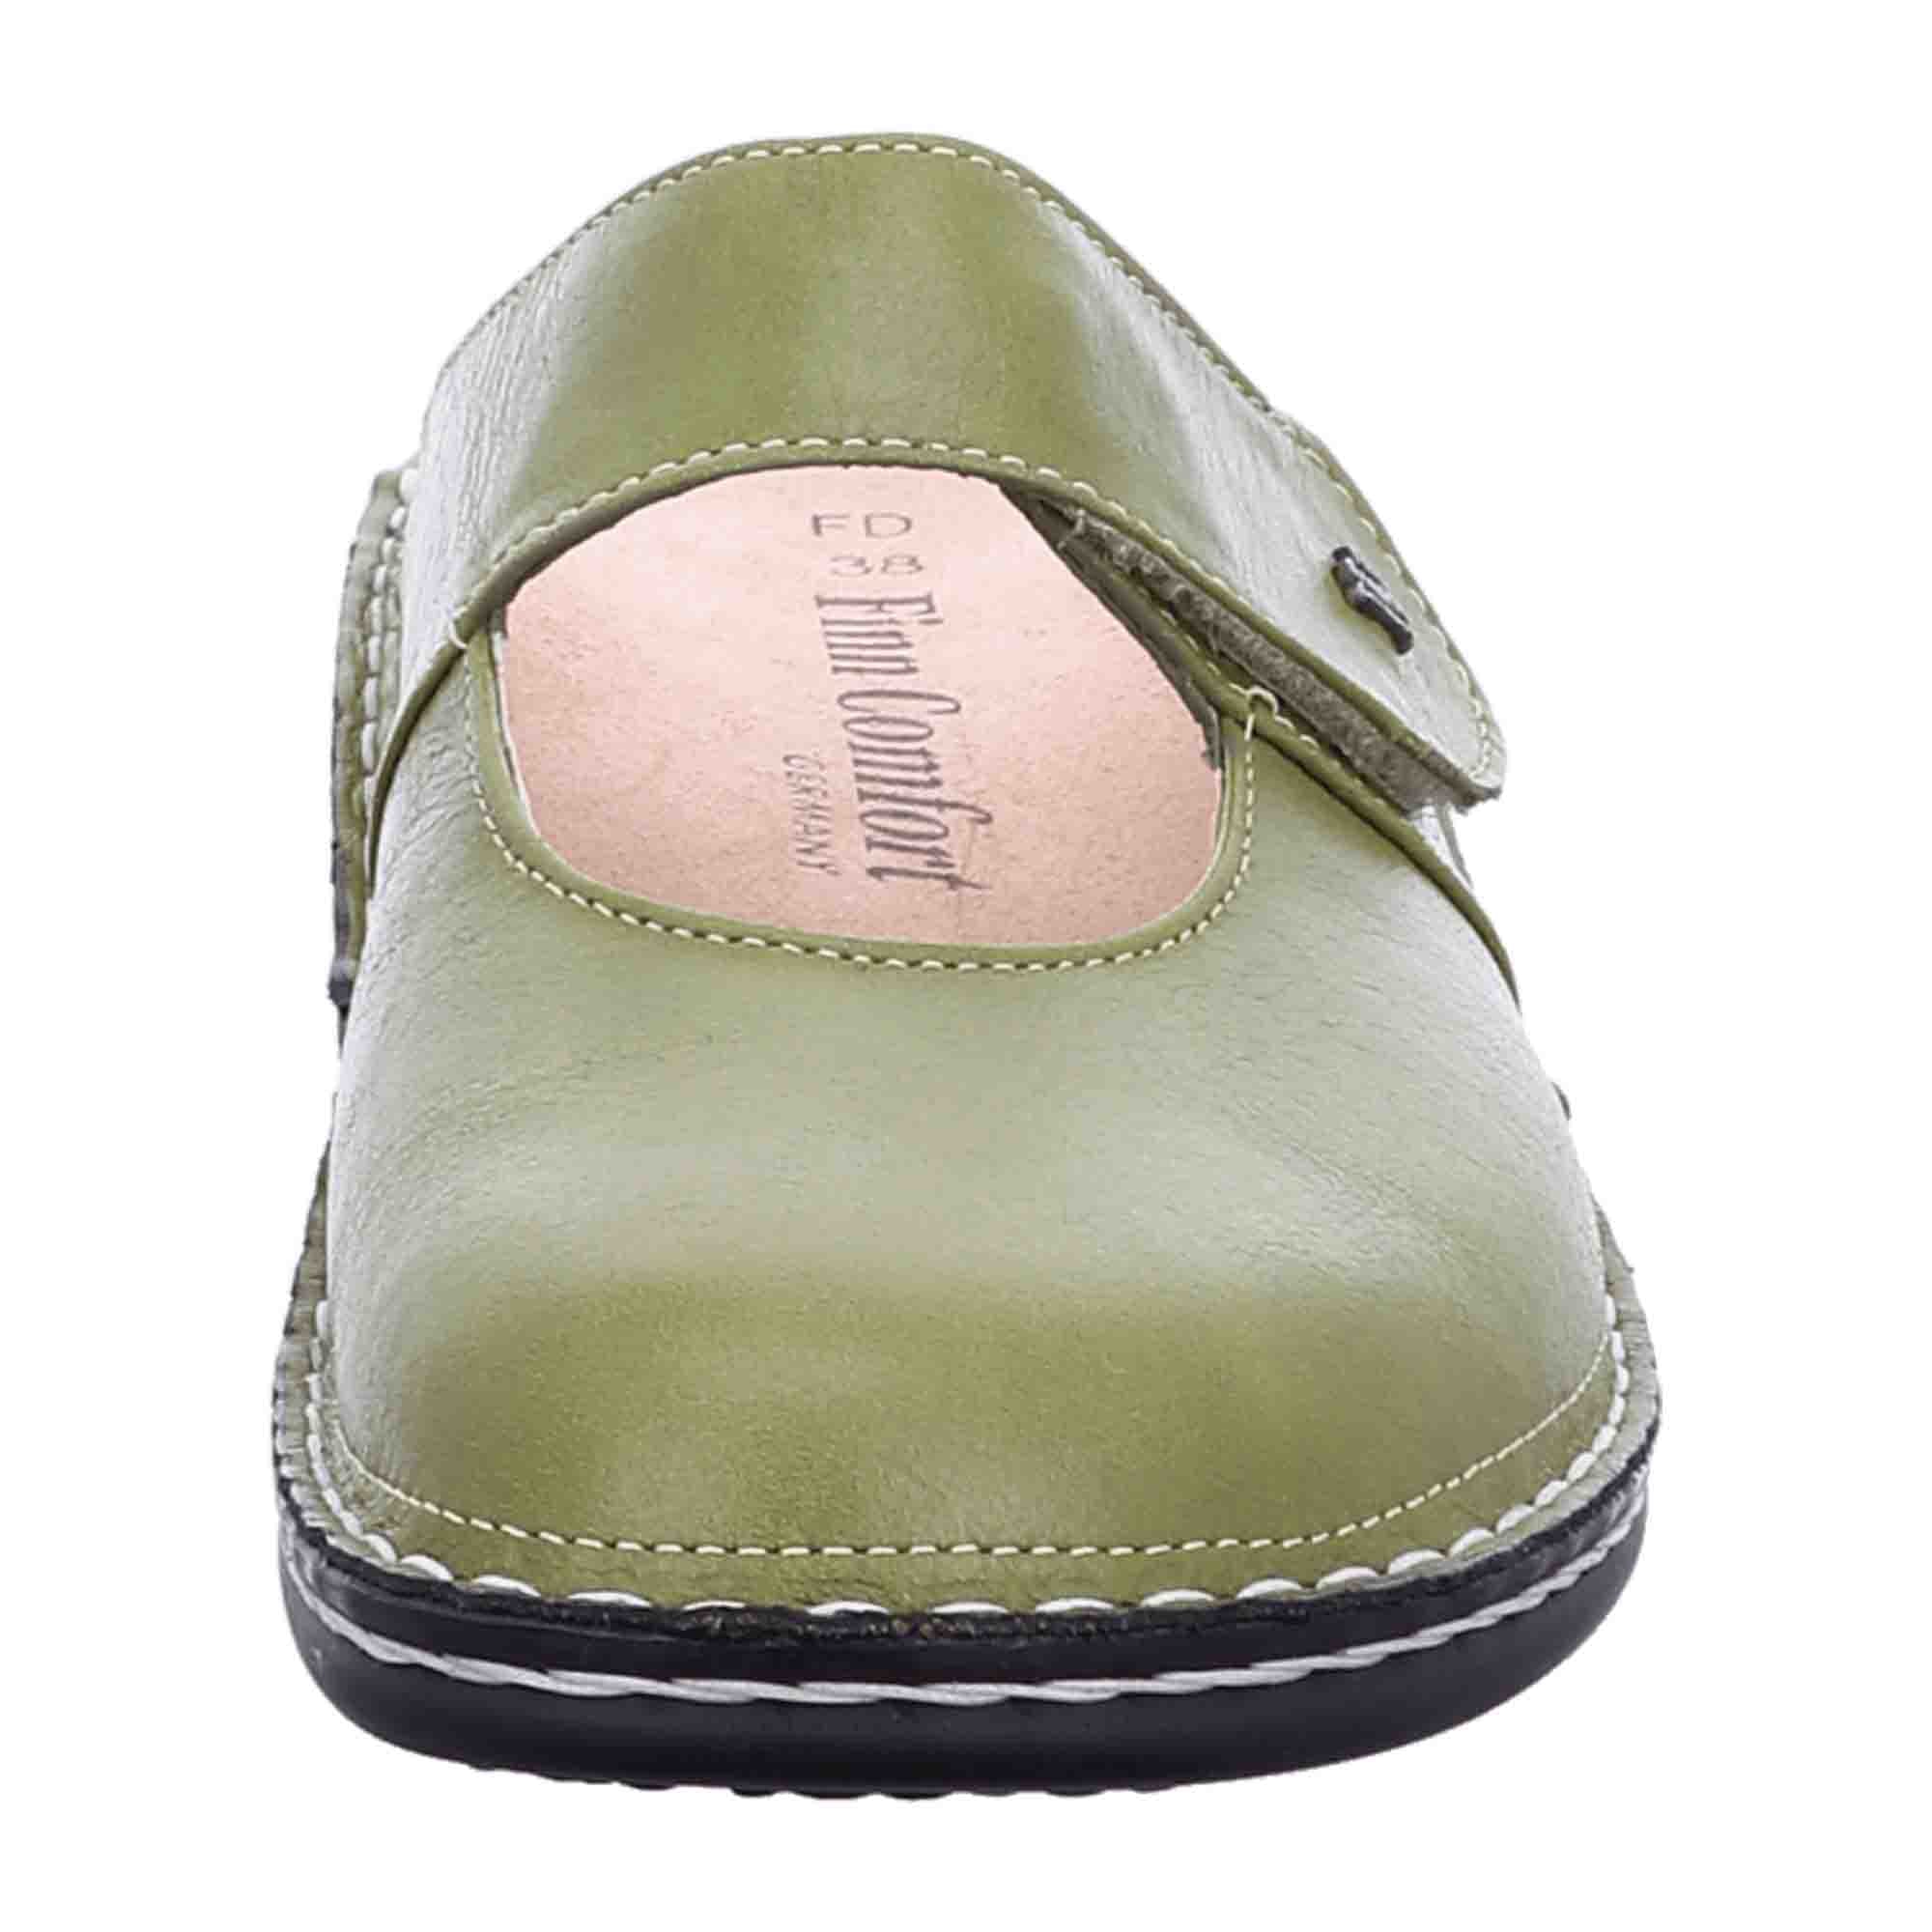 Finn Comfort Stanford Women's Clogs - Green Leather Slip-Resistant Comfortable Slides with Interchangeable Footbed